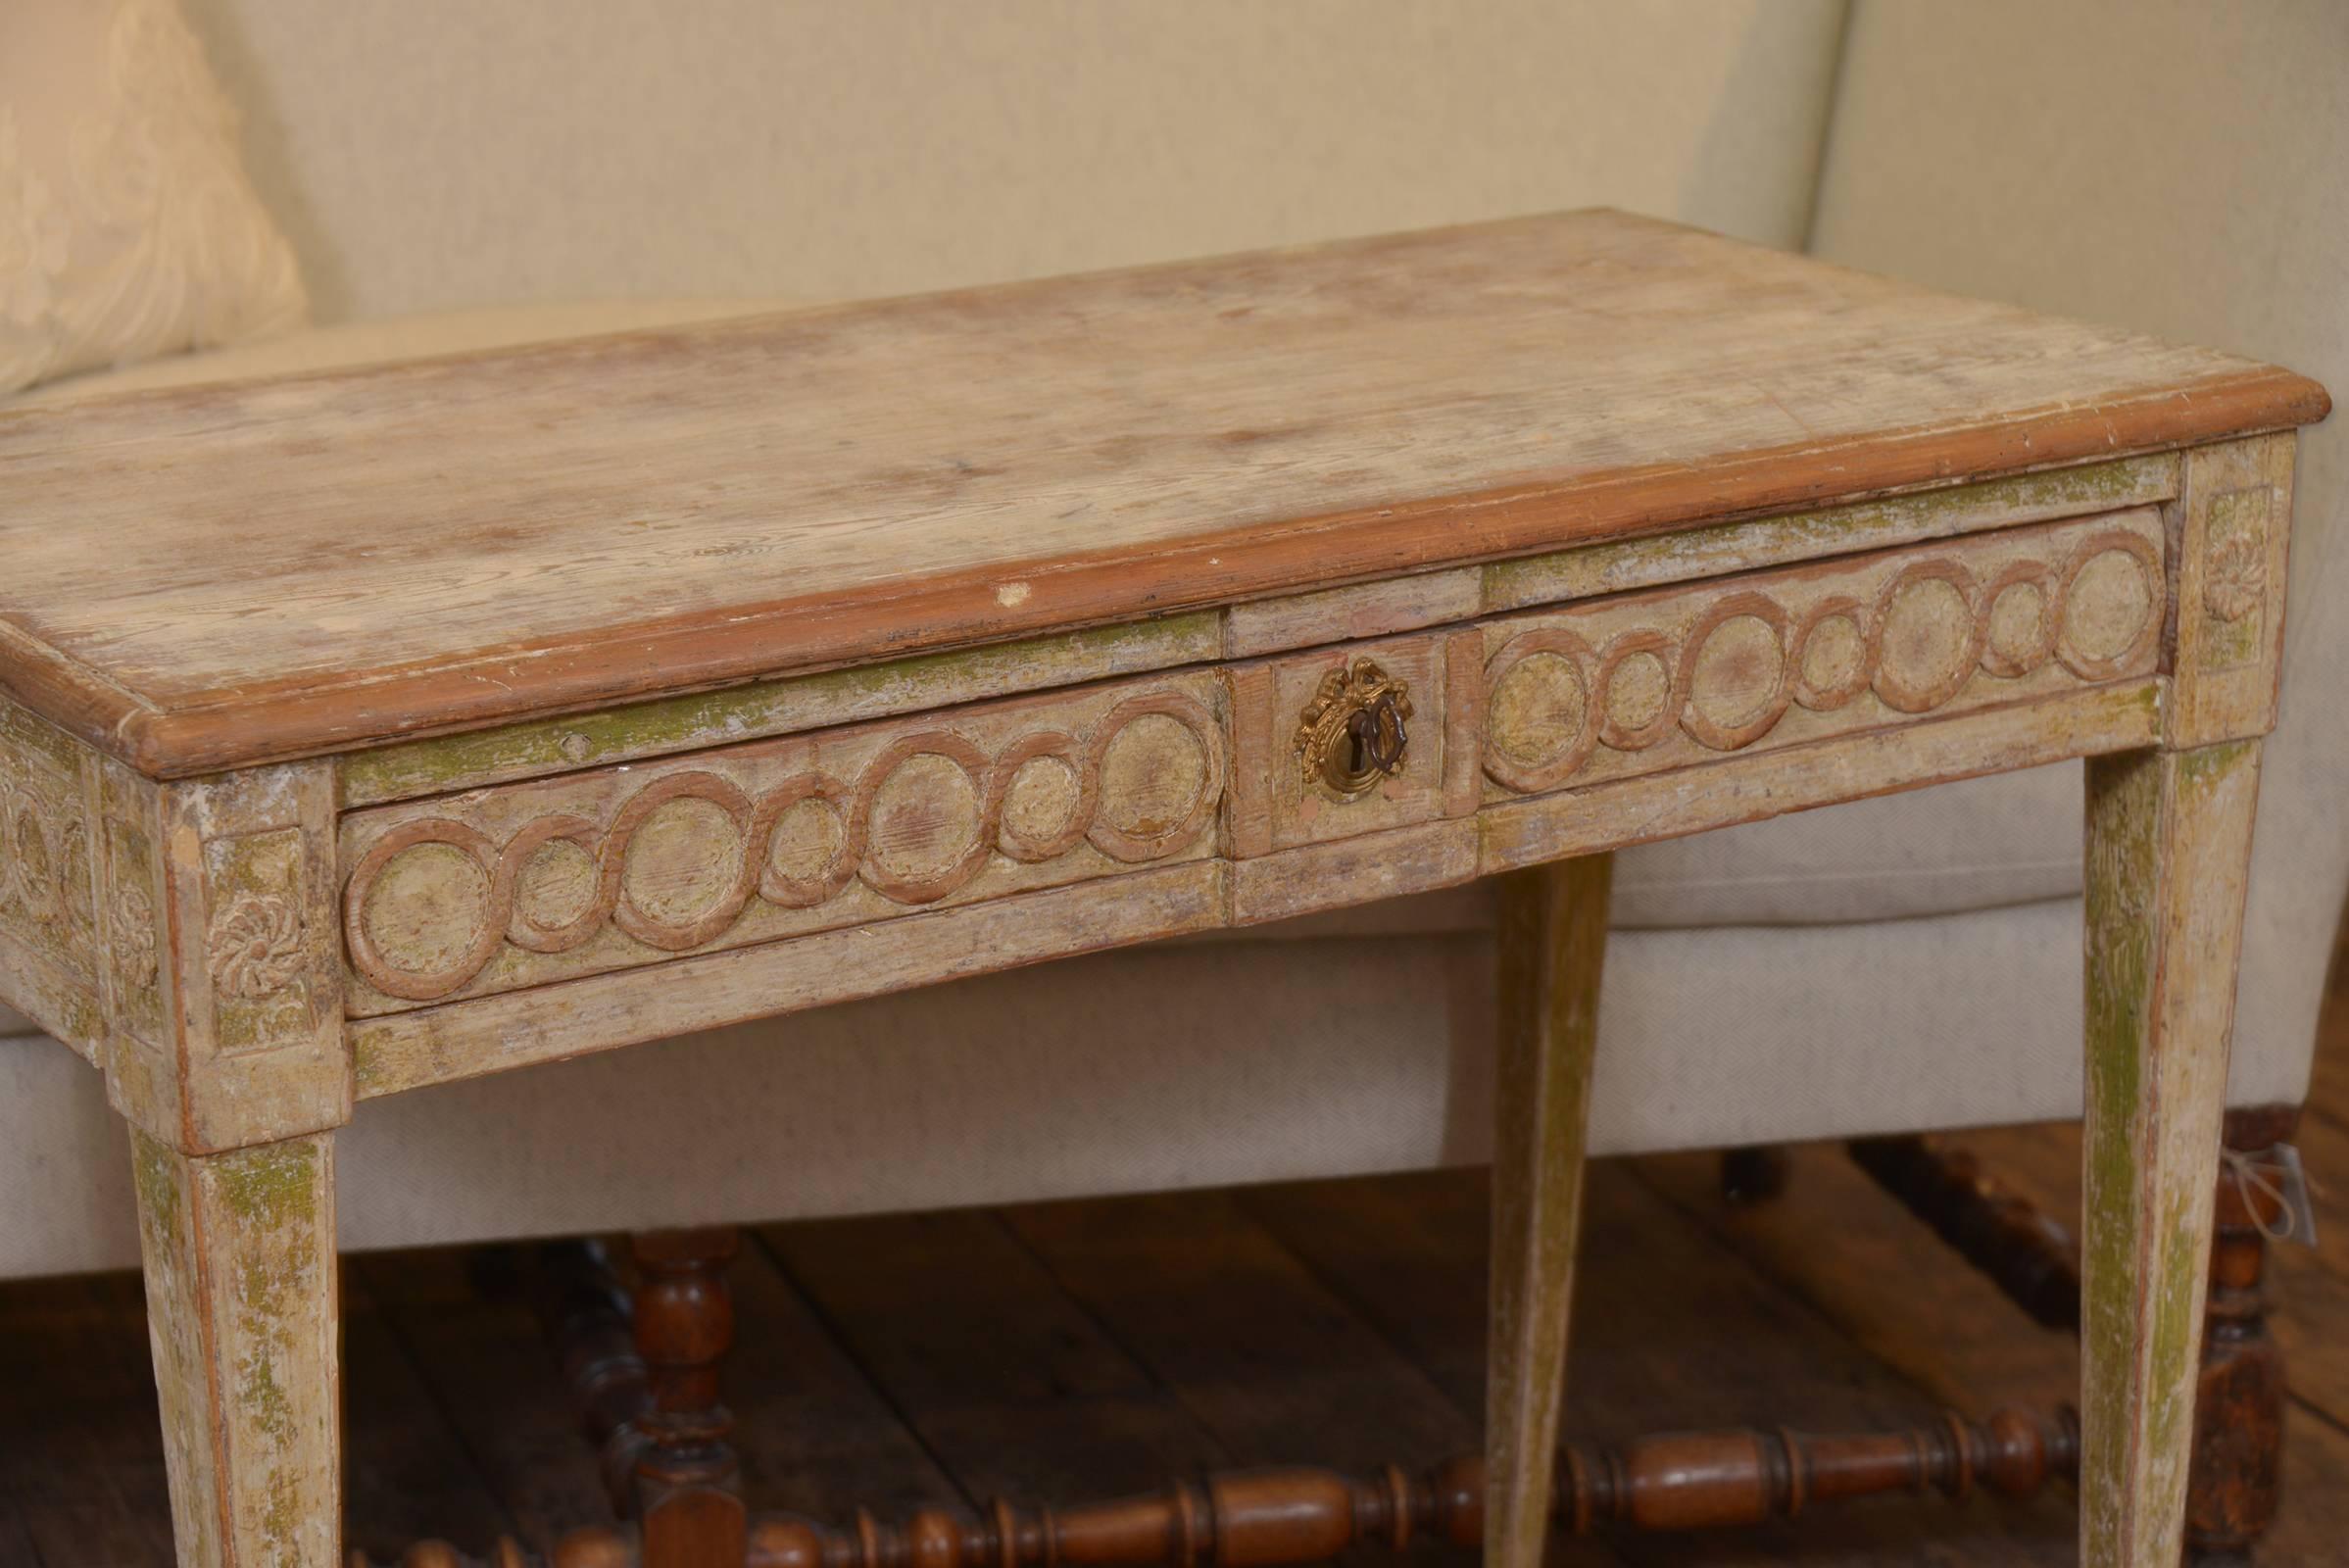 Simple but elegant Swedish Gustavian console in original paint, intricate carving and graceful legs. One single drawer.